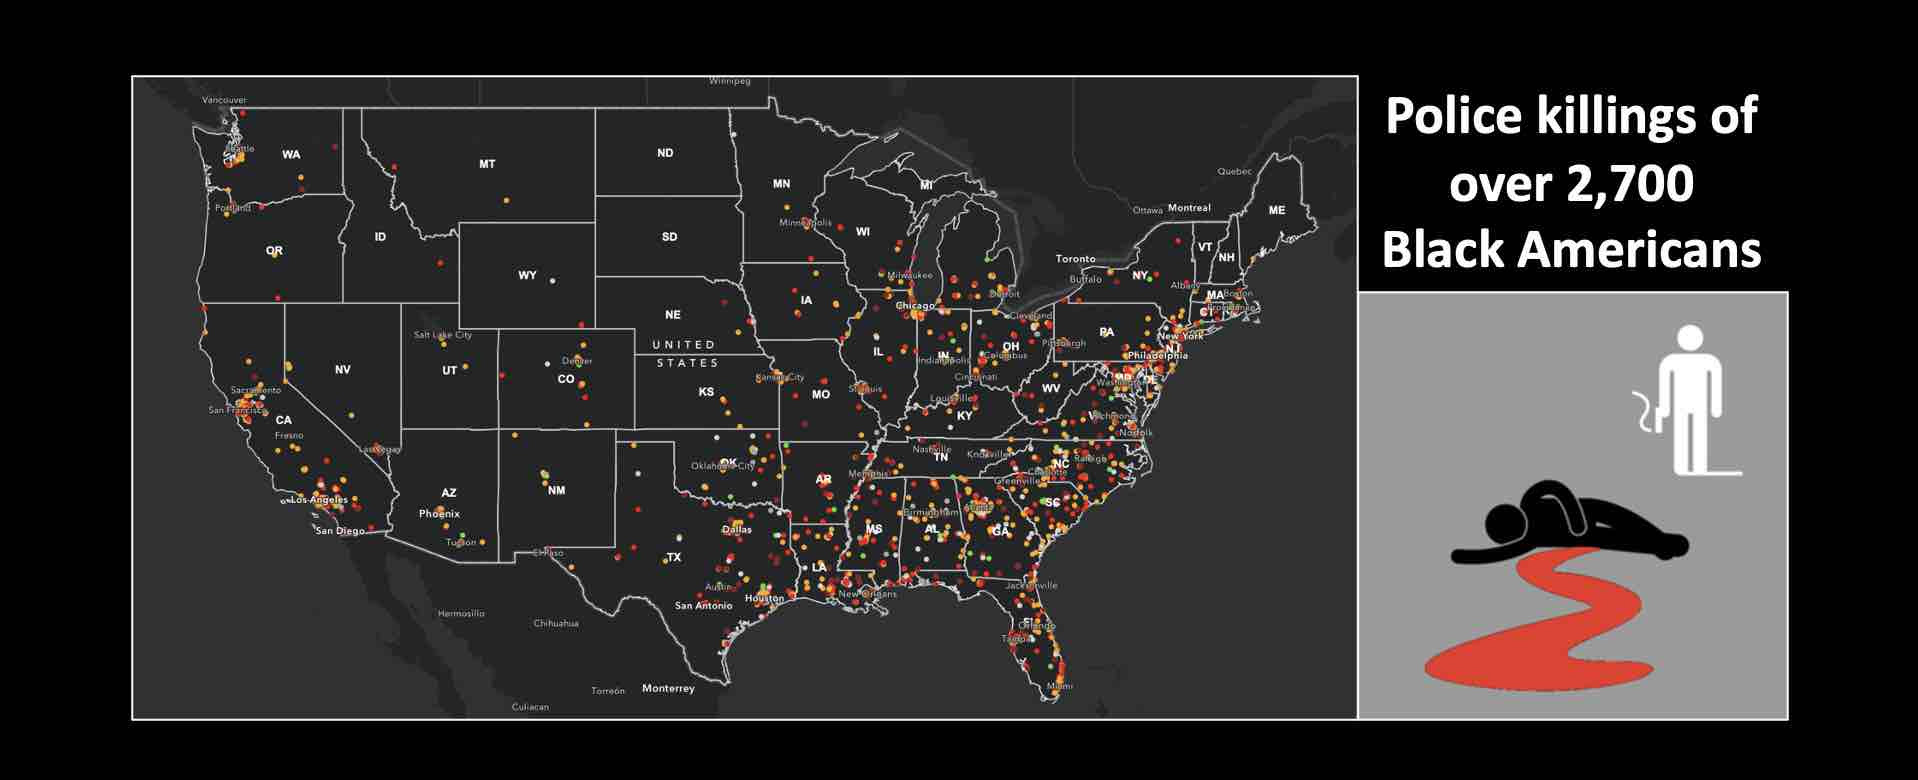 Police killings of 2,700 Black Americans mapped